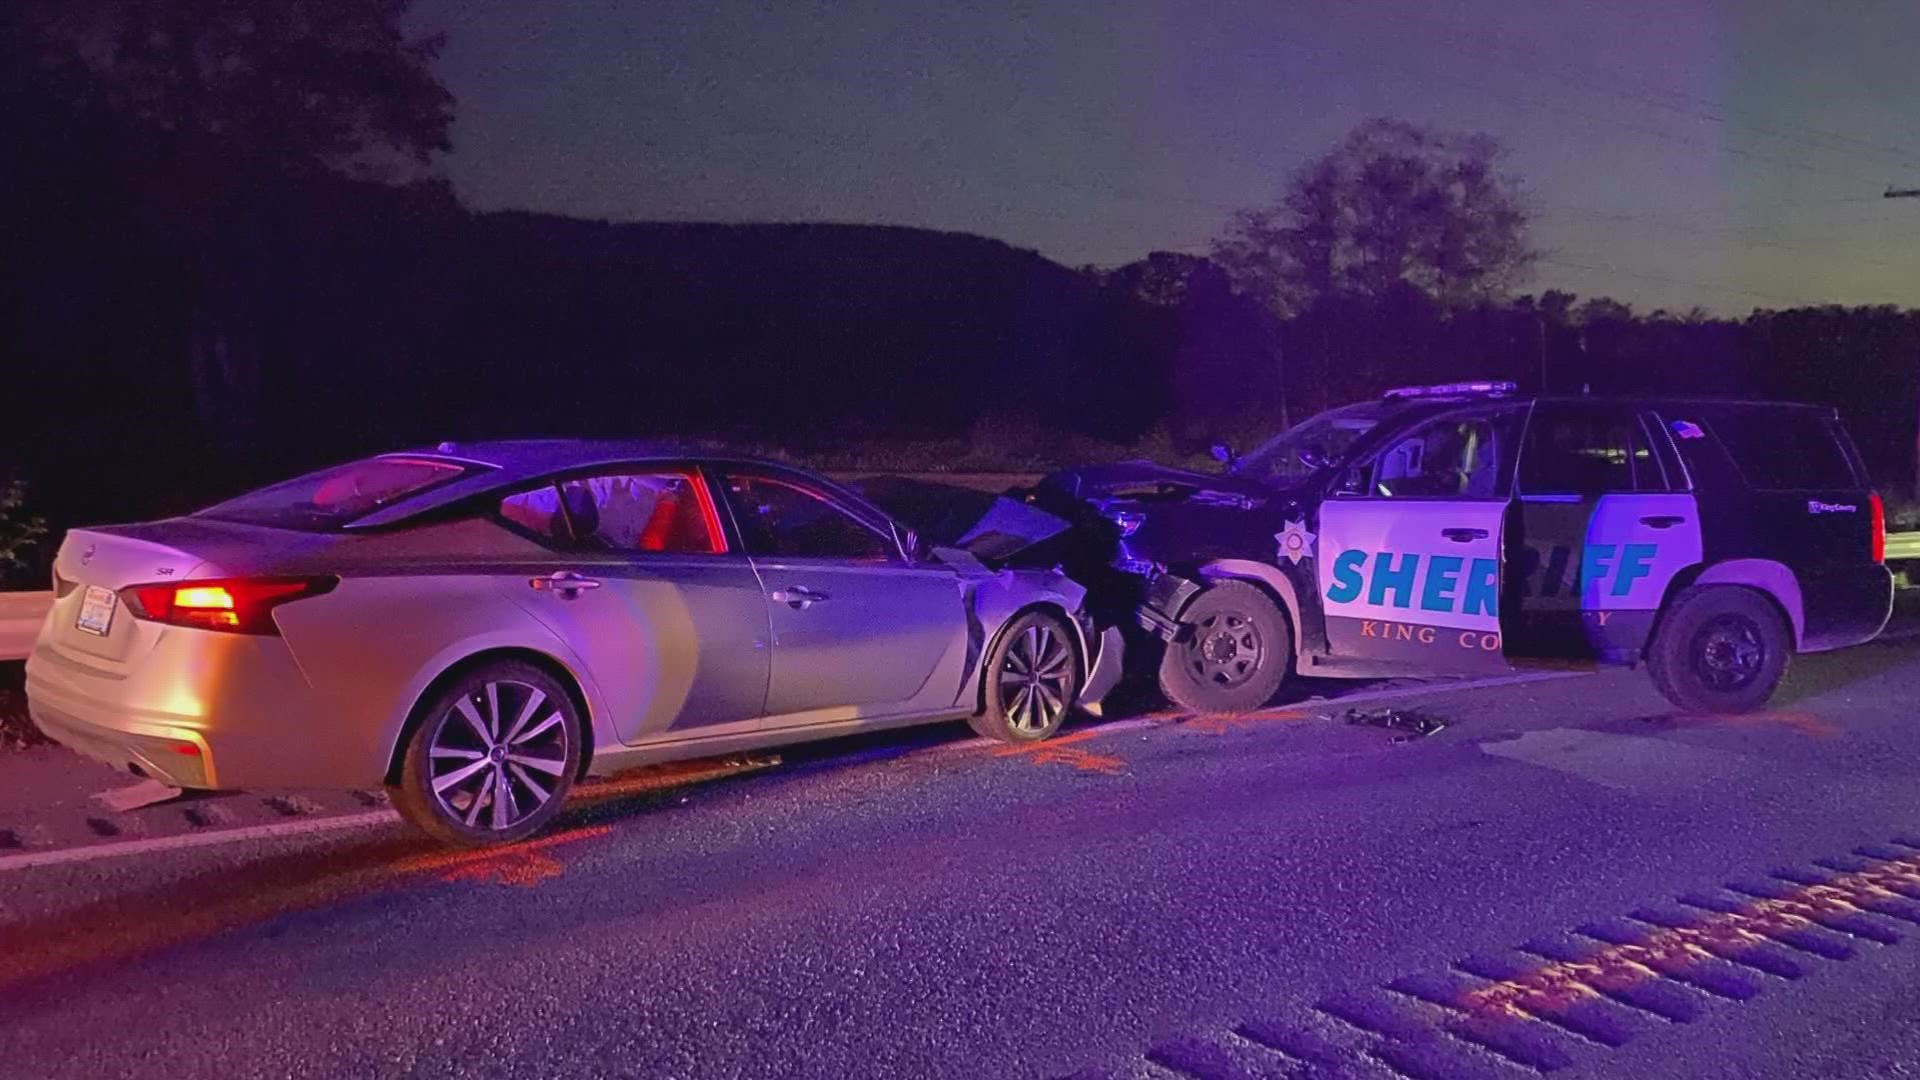 A King County Sheriff's deputy is recovering after an accident involving a suspected DUI driver Wednesday night in Monroe